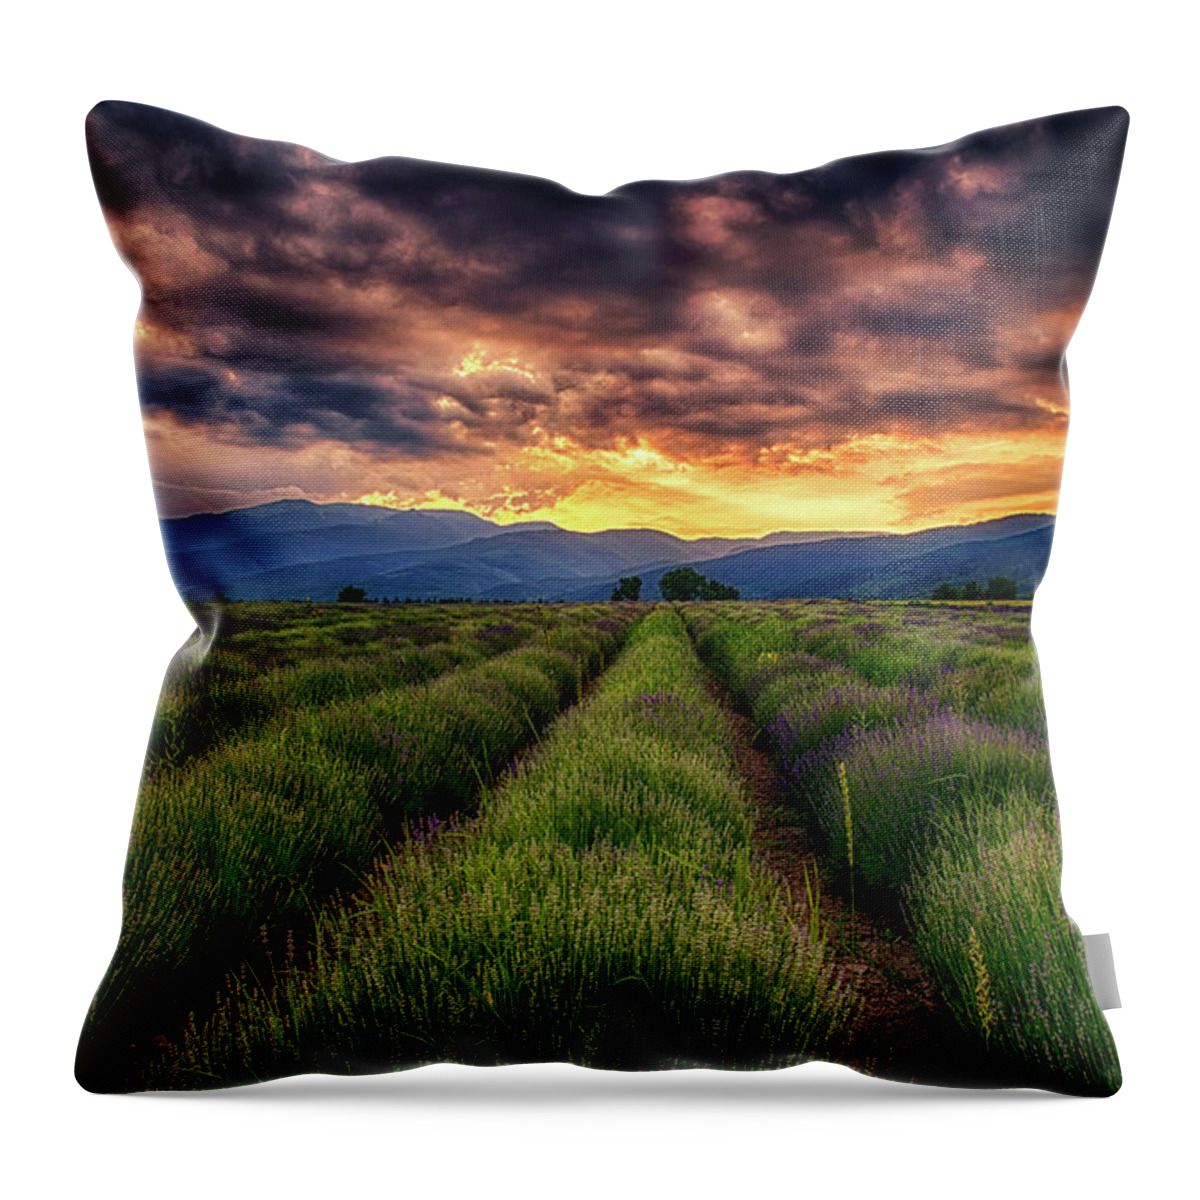 Field Throw Pillow featuring the photograph Sunset Over Lavender Field by Plamen Petkov